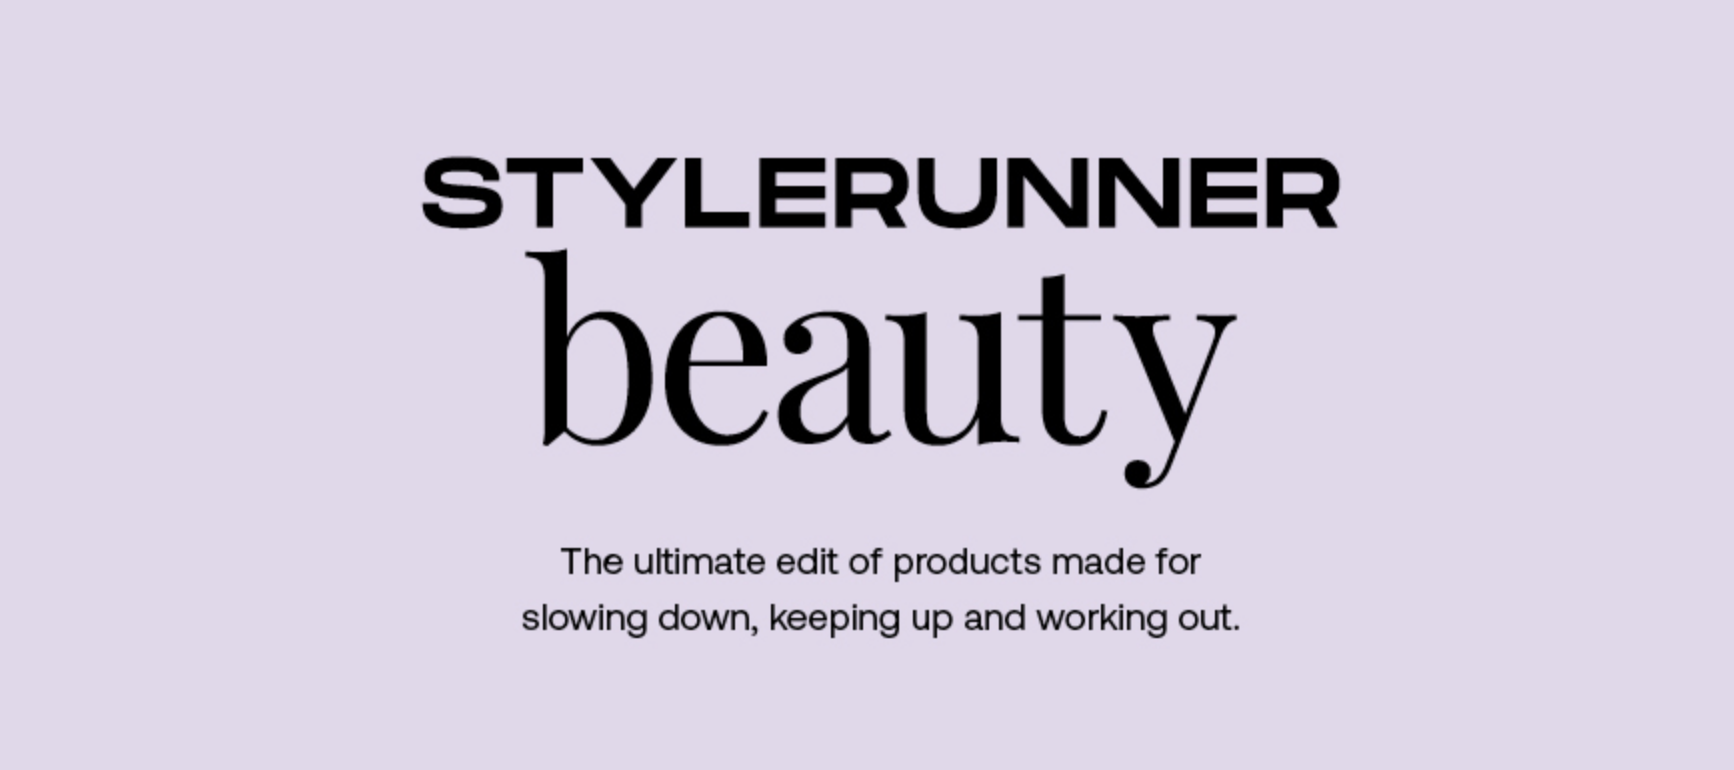 Stylerunner introduces beauty and self-care edit Image